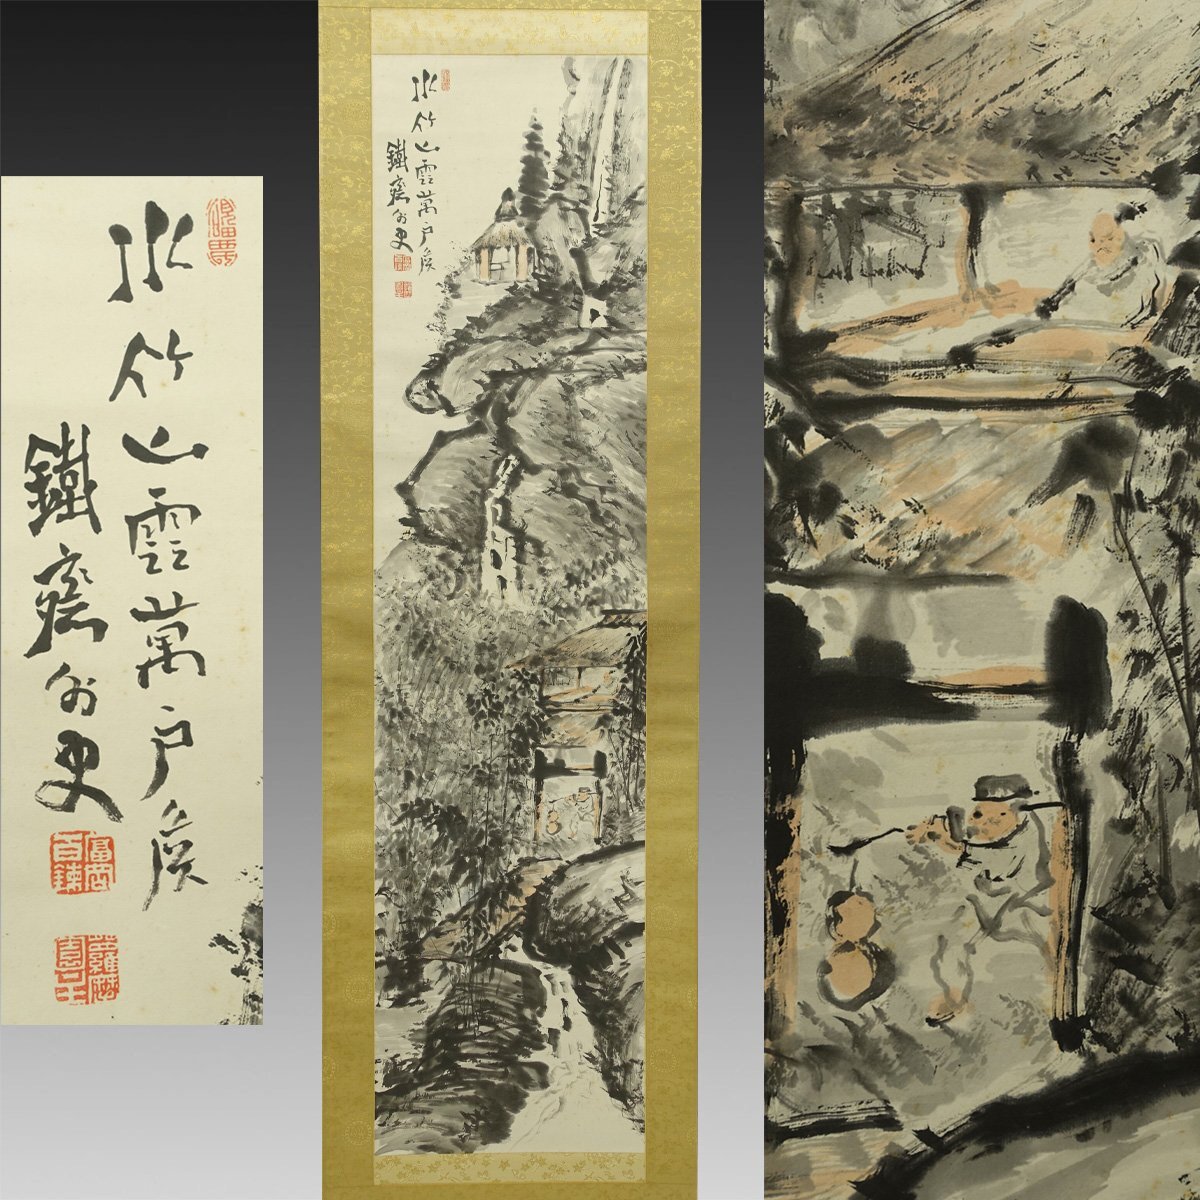 [Authentic work] Kimon ◆ Tomioka Tessai Chinese landscape painting, Chinese poems and poems (Water bamboo and mountains) 1 width, old handwriting, old document, old book, Japanese painting, southern painting, literati painting, Chinese painting, interaction with Wu Changshuo, tea ceremony, Meiji era, artwork, book, hanging scroll